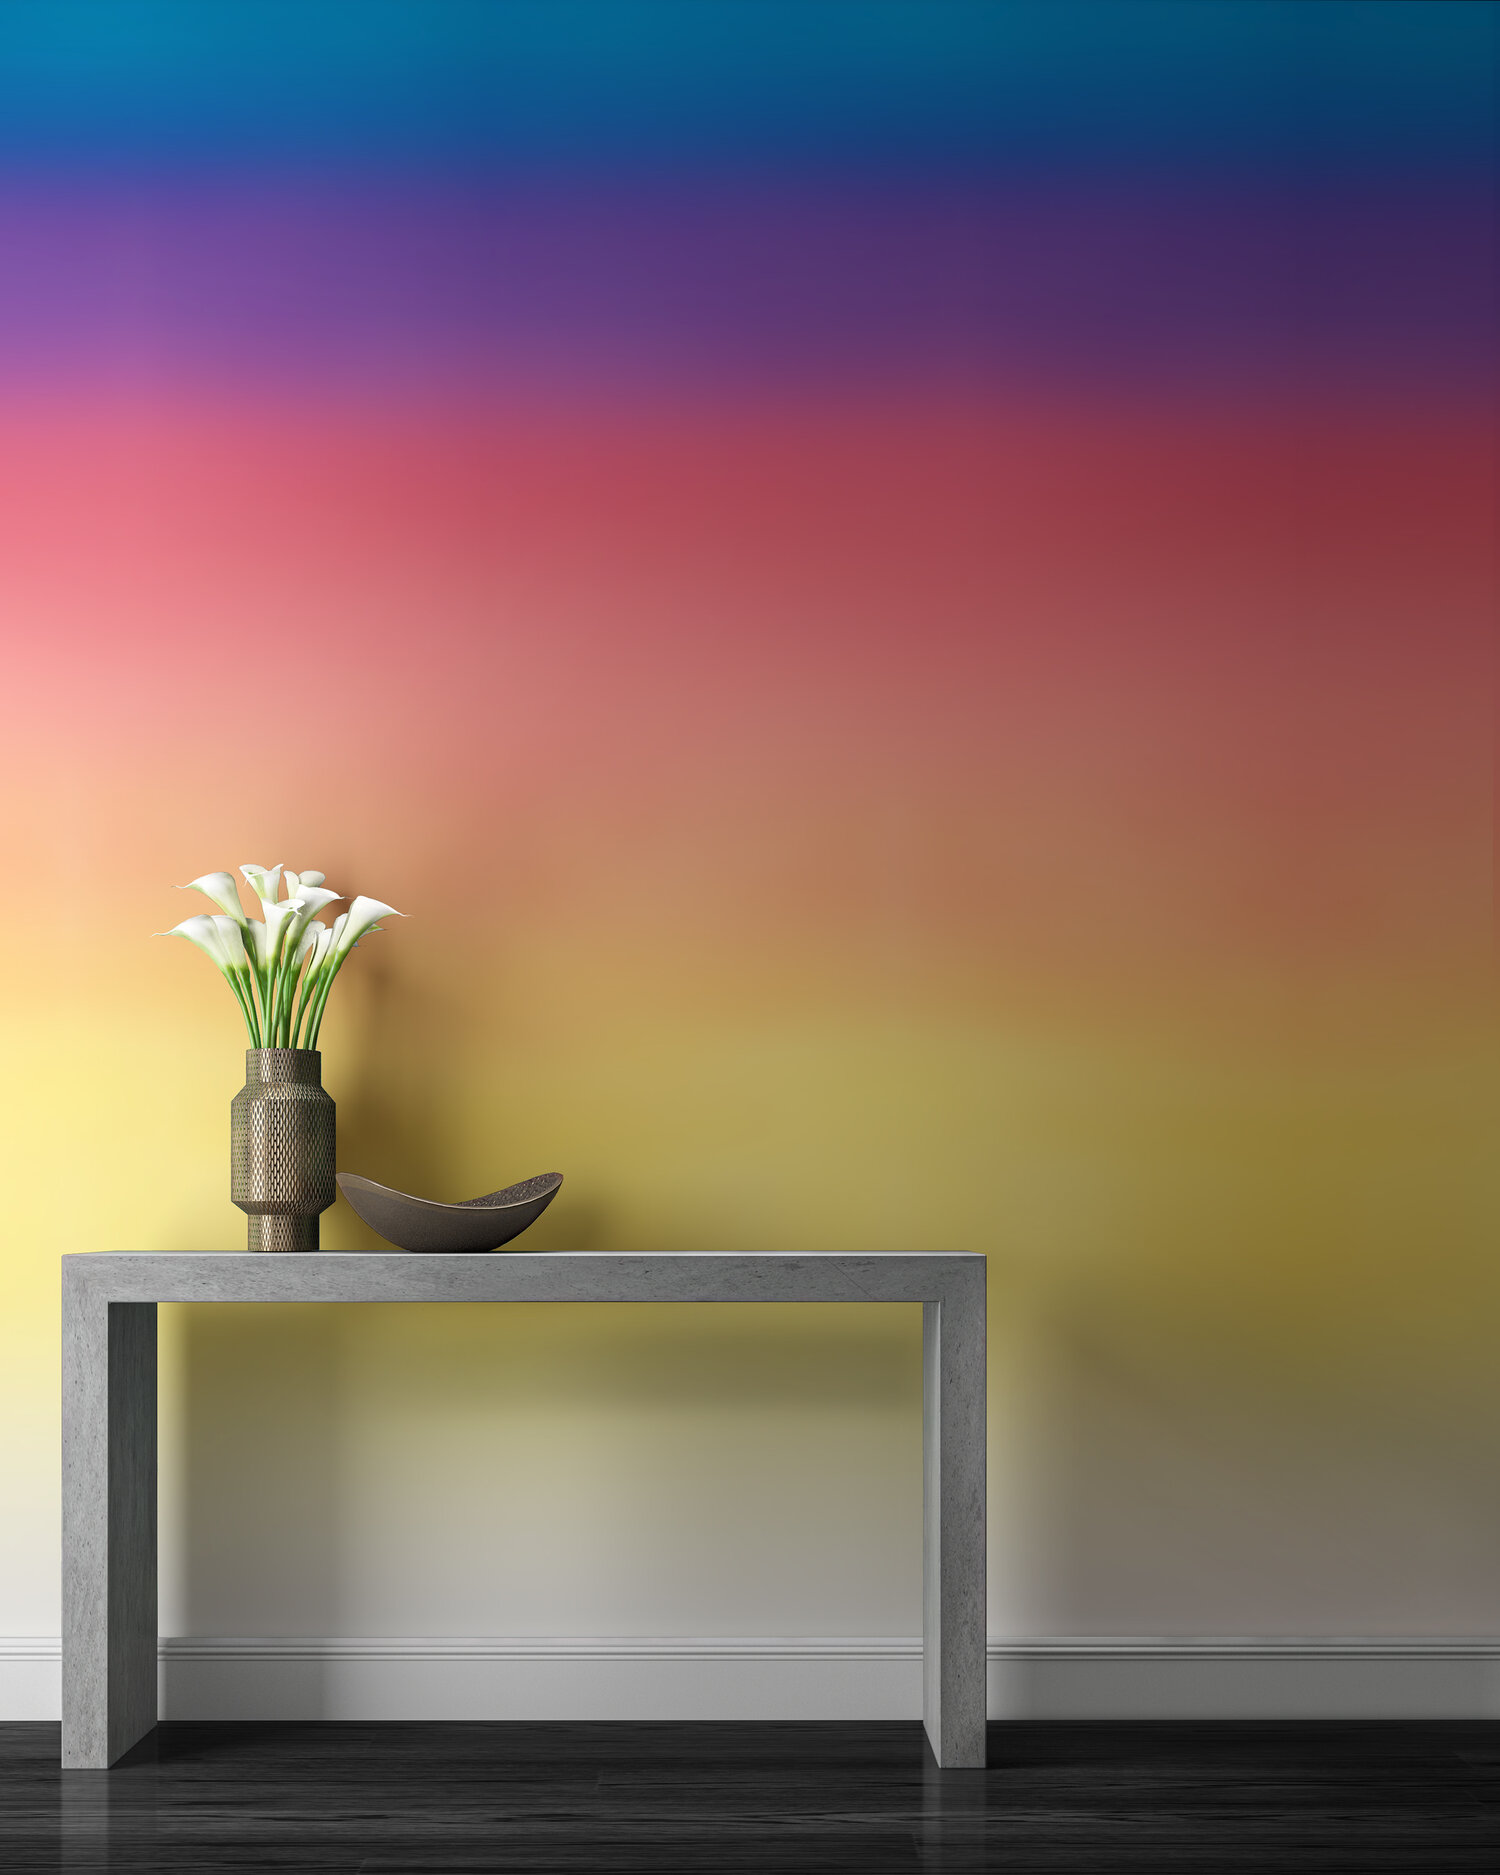 Rainbow colored wall with Parsons-style table with flower in a vase in front.